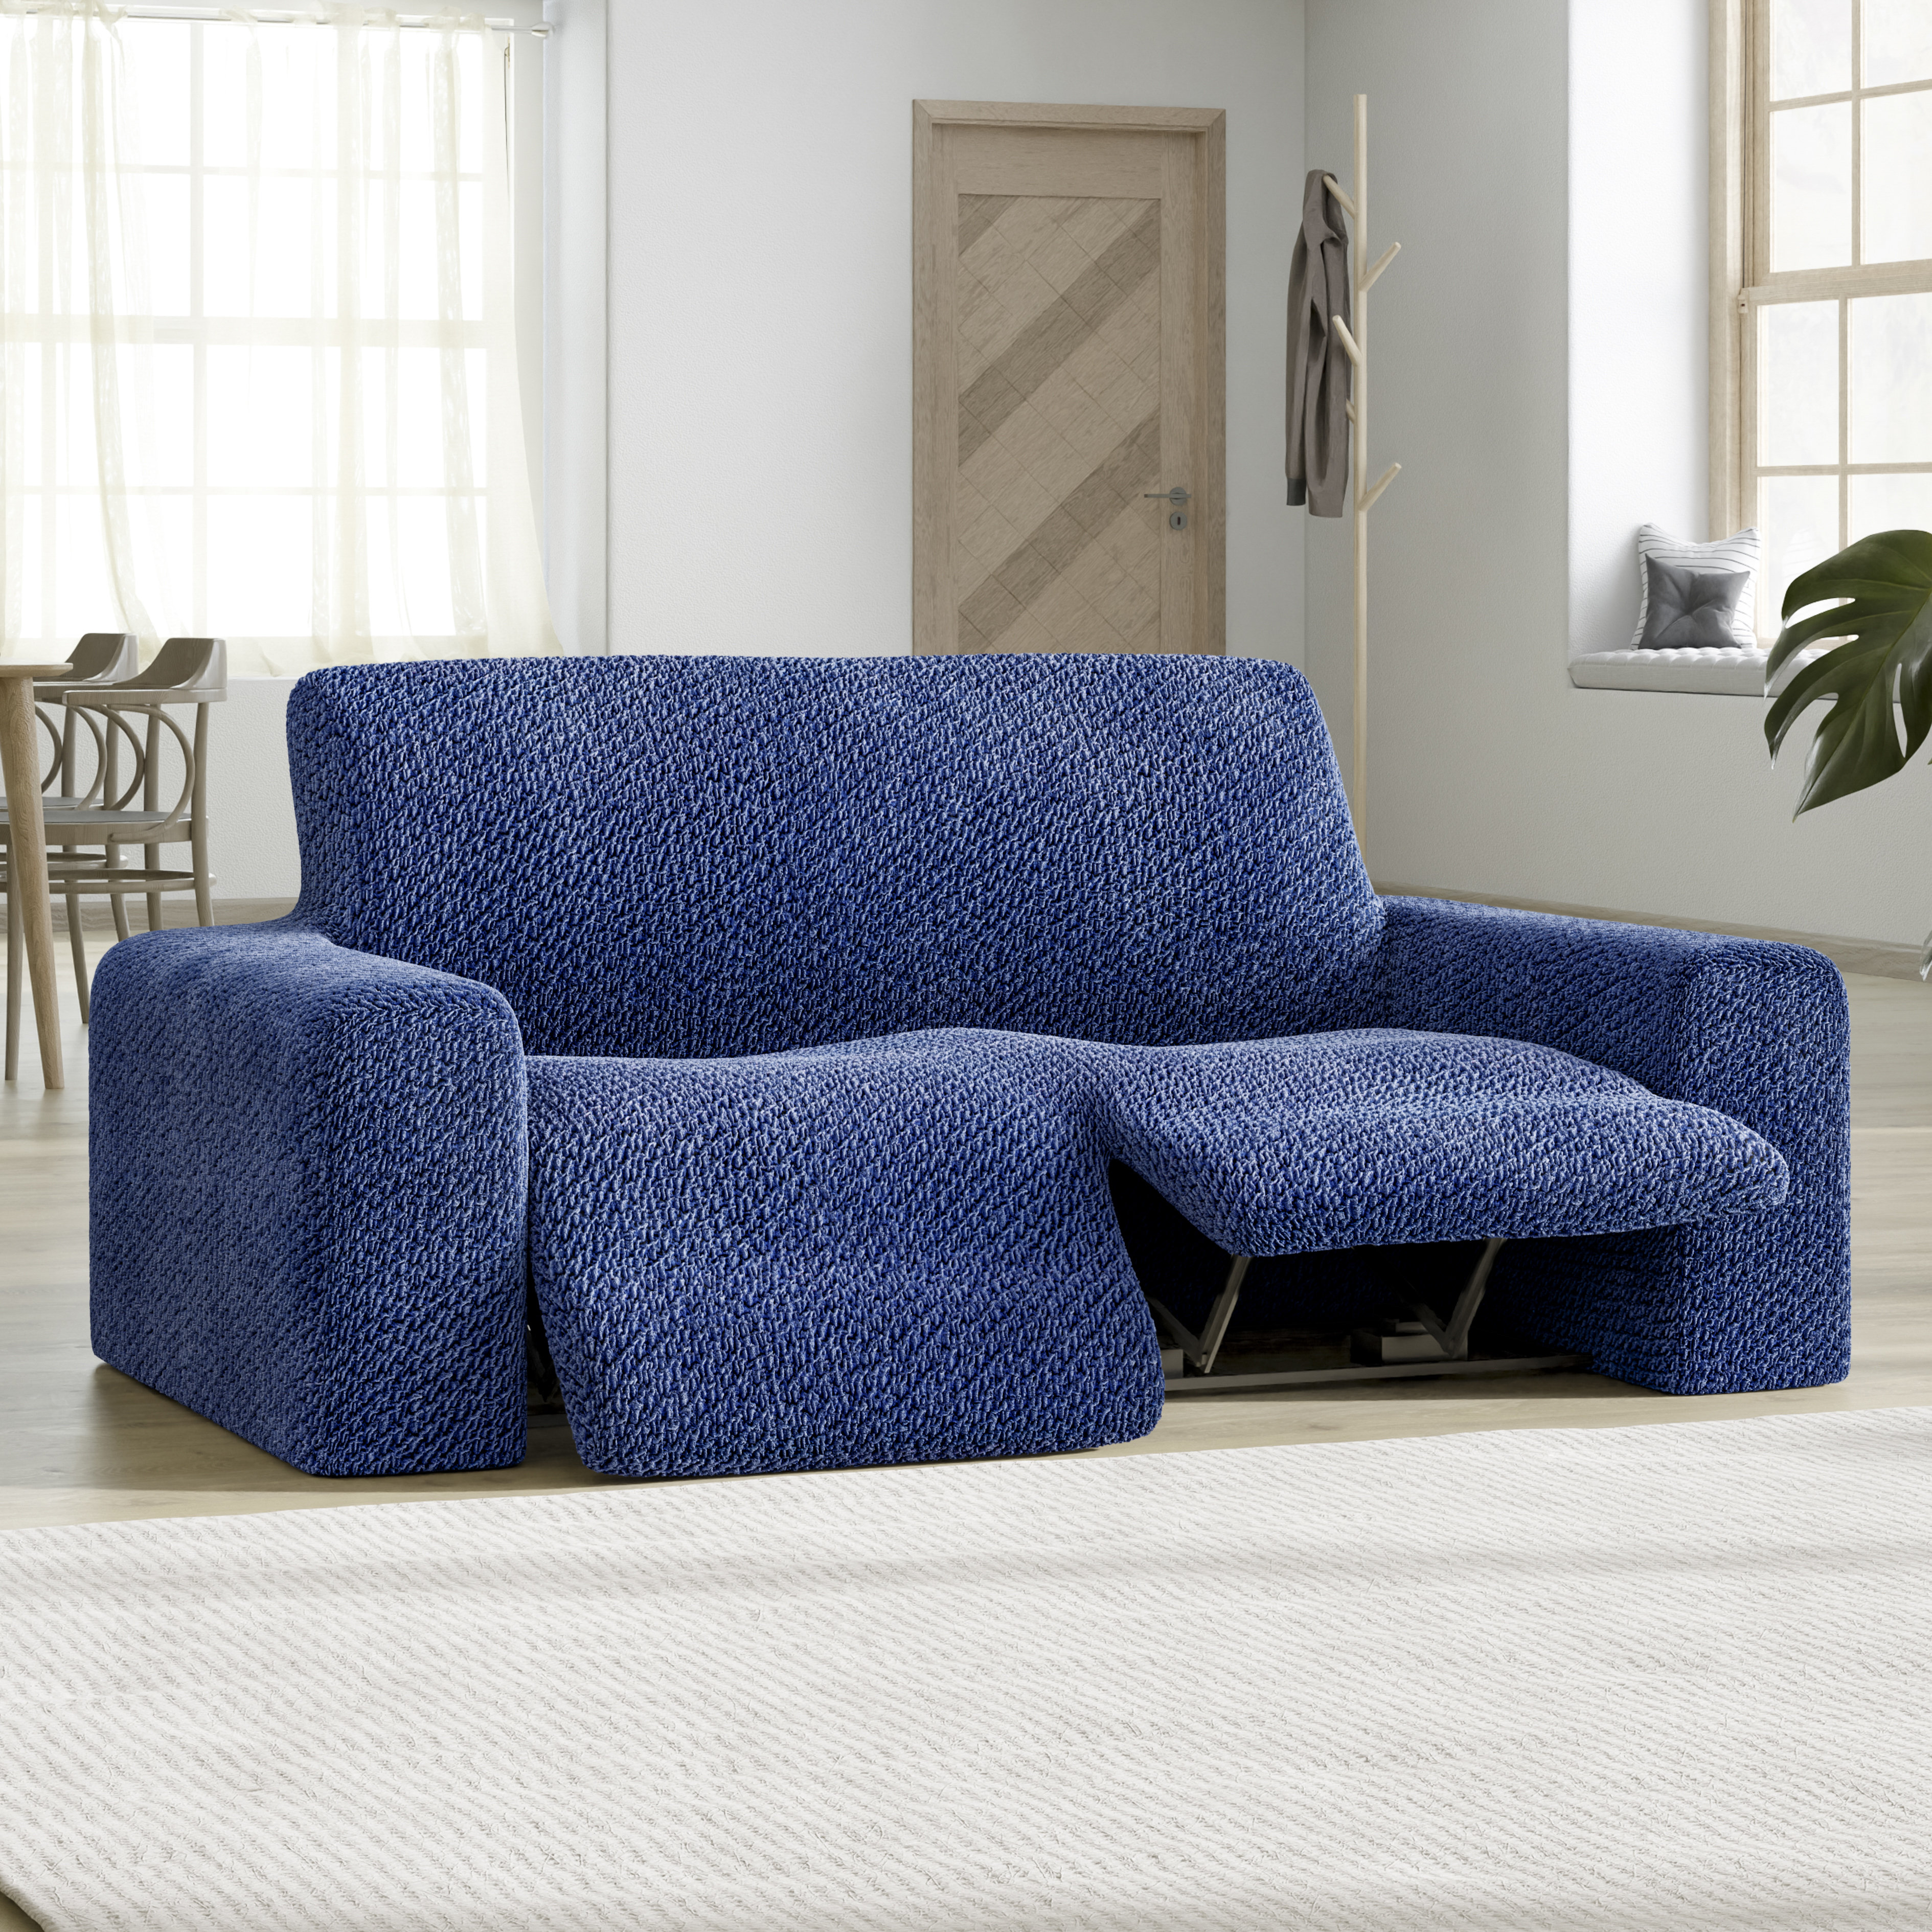 PAULATO by GA.I.CO. Microfibra Collection Stretch Recliner Sofa Slipcover -  Easy to Clean & Durable & Reviews